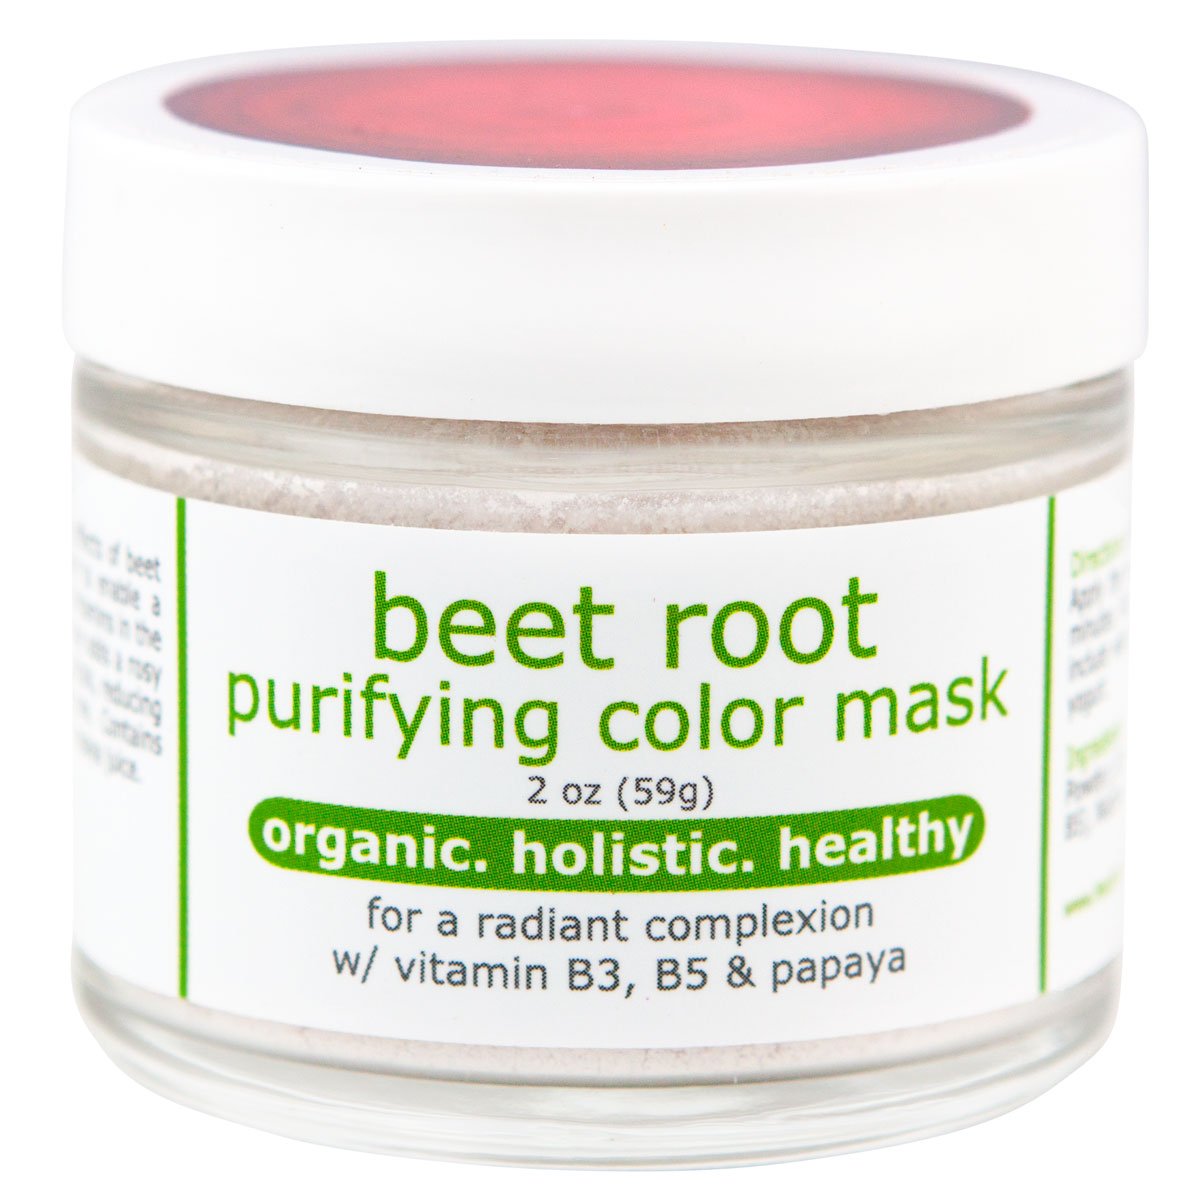 beet root mask - beet-root-mask